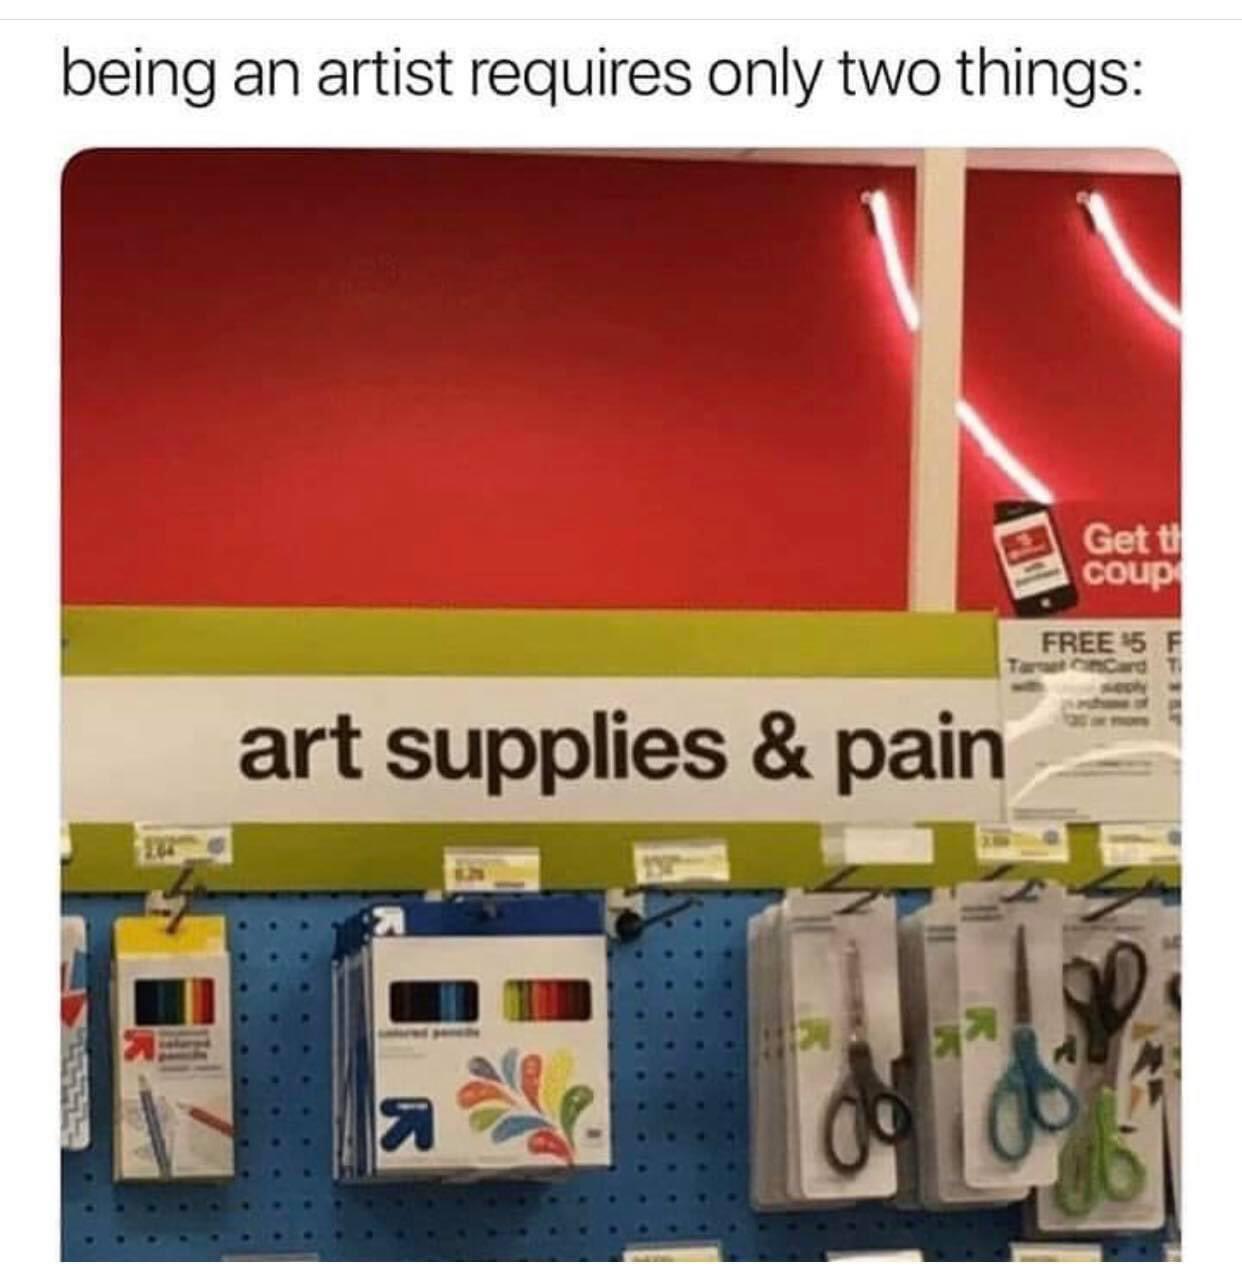 funny memes - dank memes - art supplies and pain meme - being an artist requires only two things Get to coup Free 5 F Card T art supplies & pain R